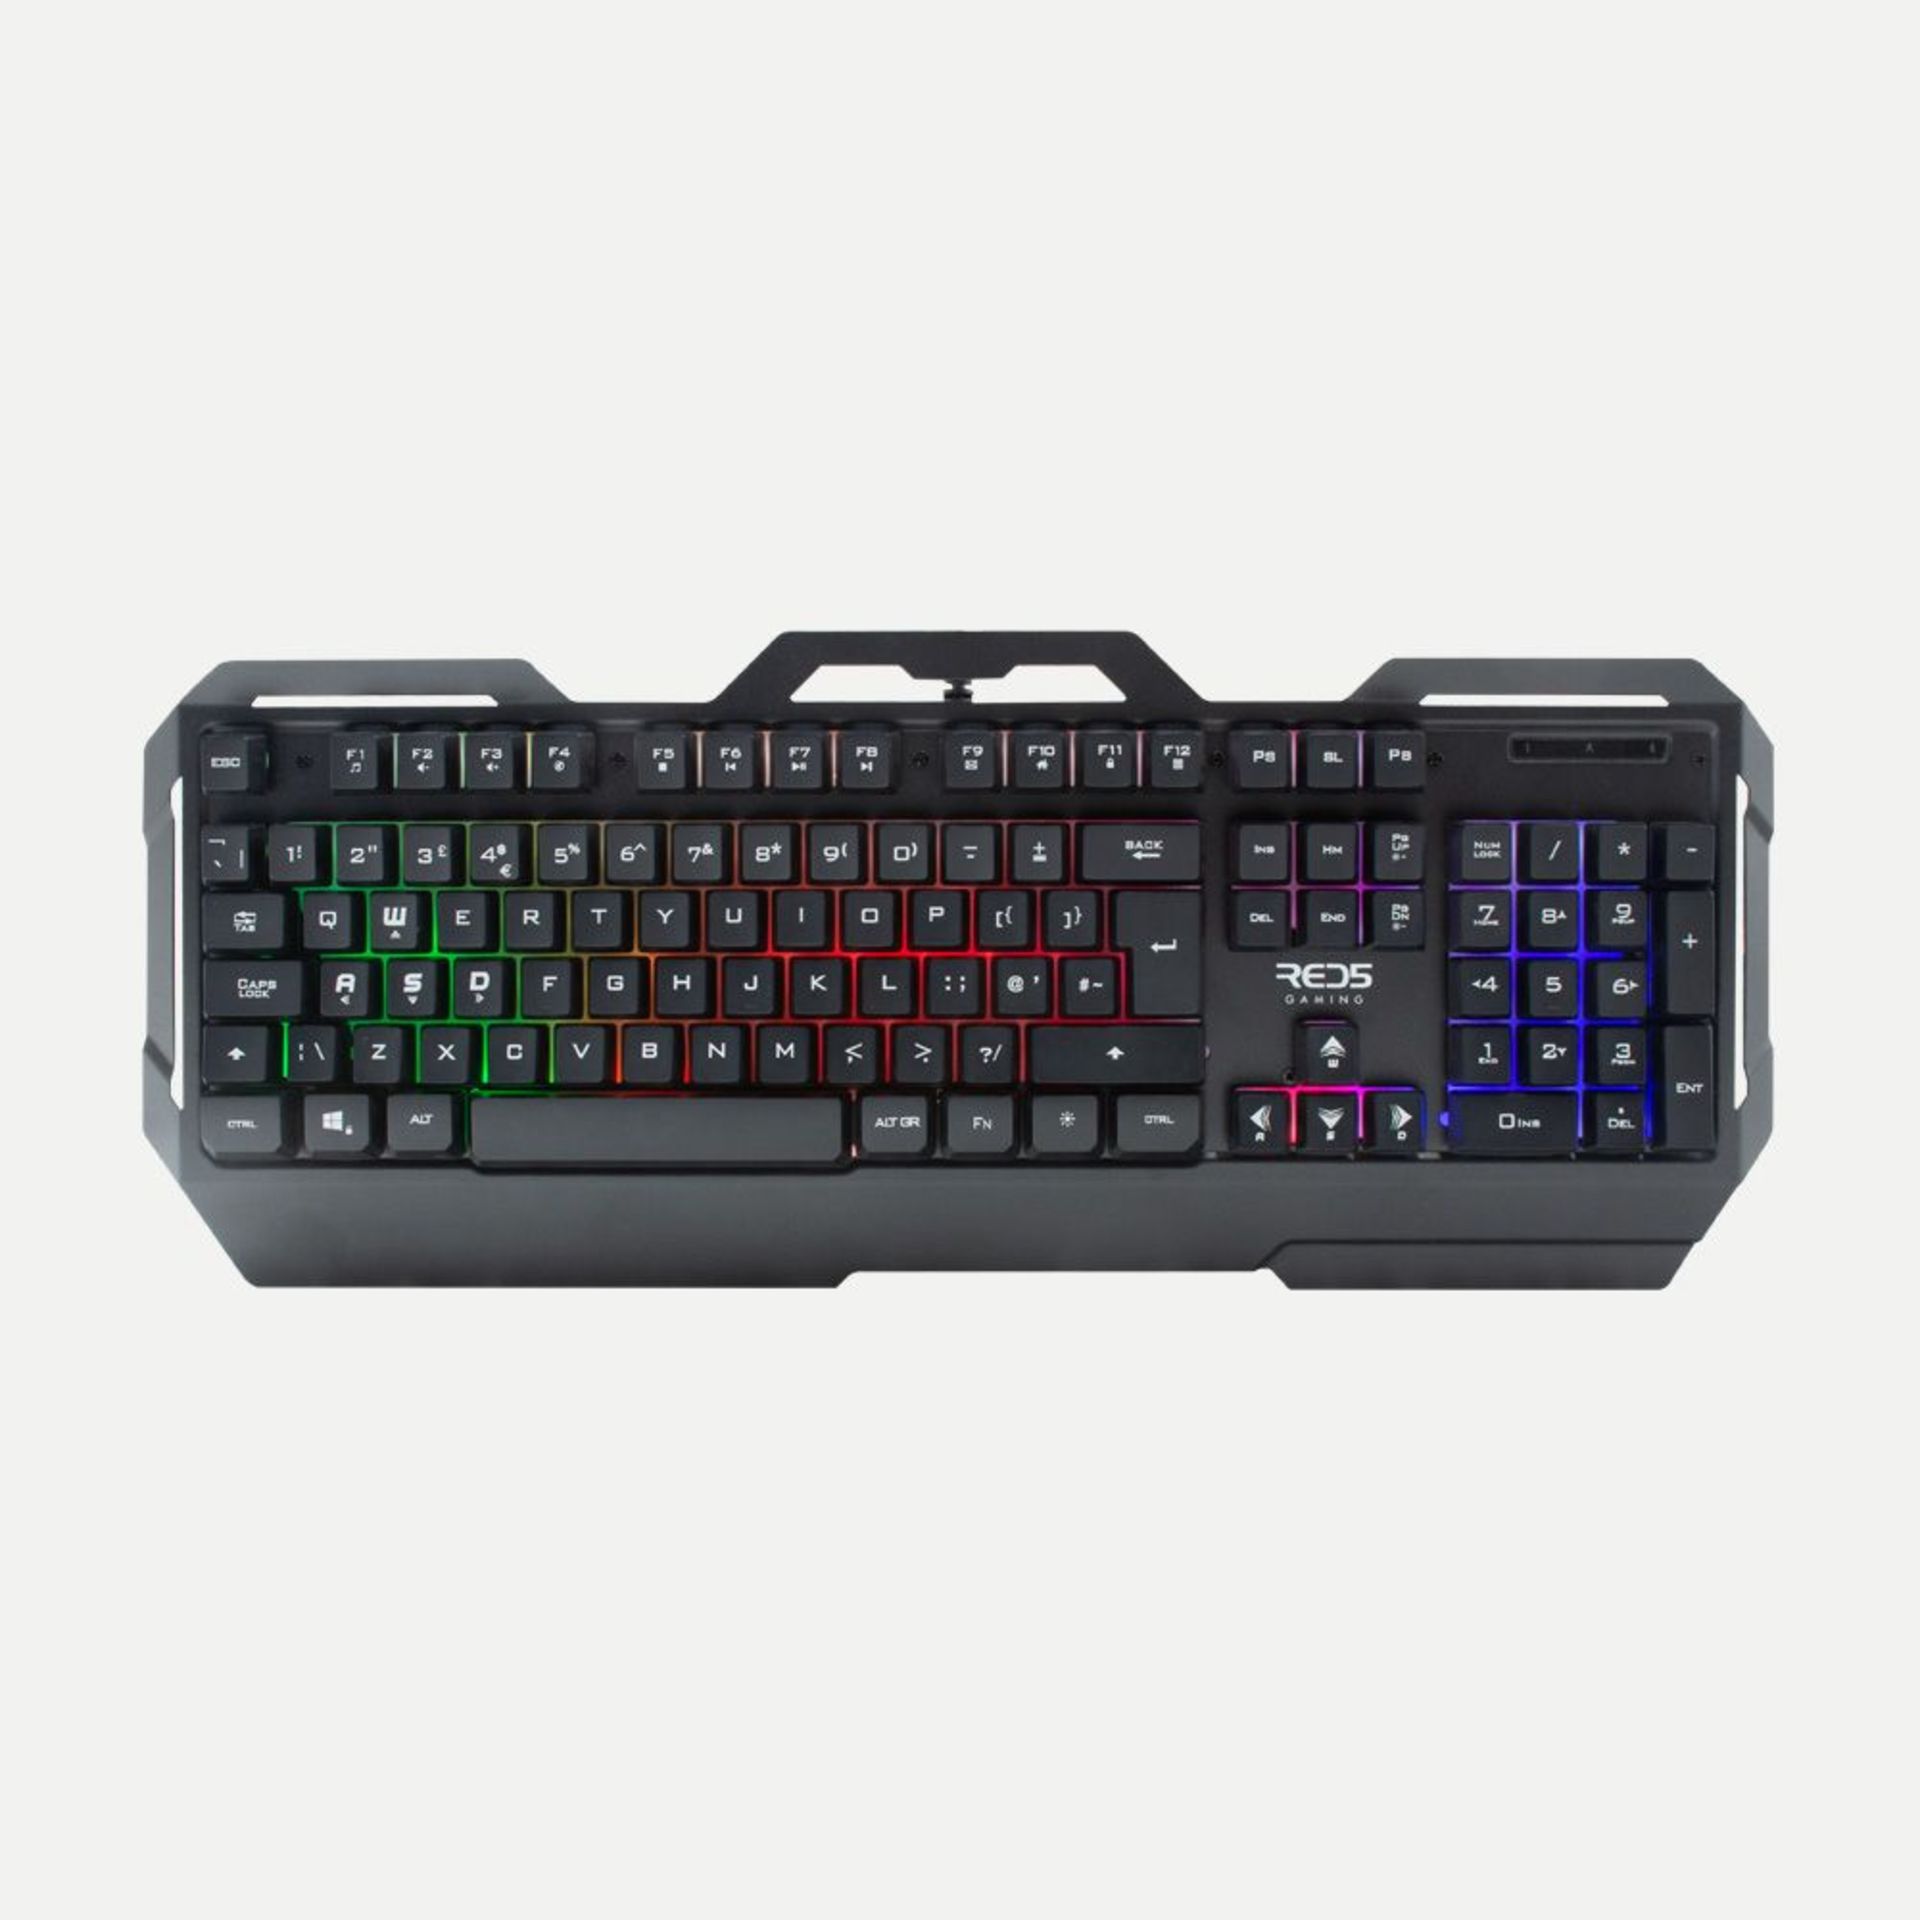 (6D) 8x Items. 6x Red5 Light Up Gaming Keyboard. 1x Red5 Orbit Light Up Gaming Keyboard. 1x Trust... - Image 4 of 12